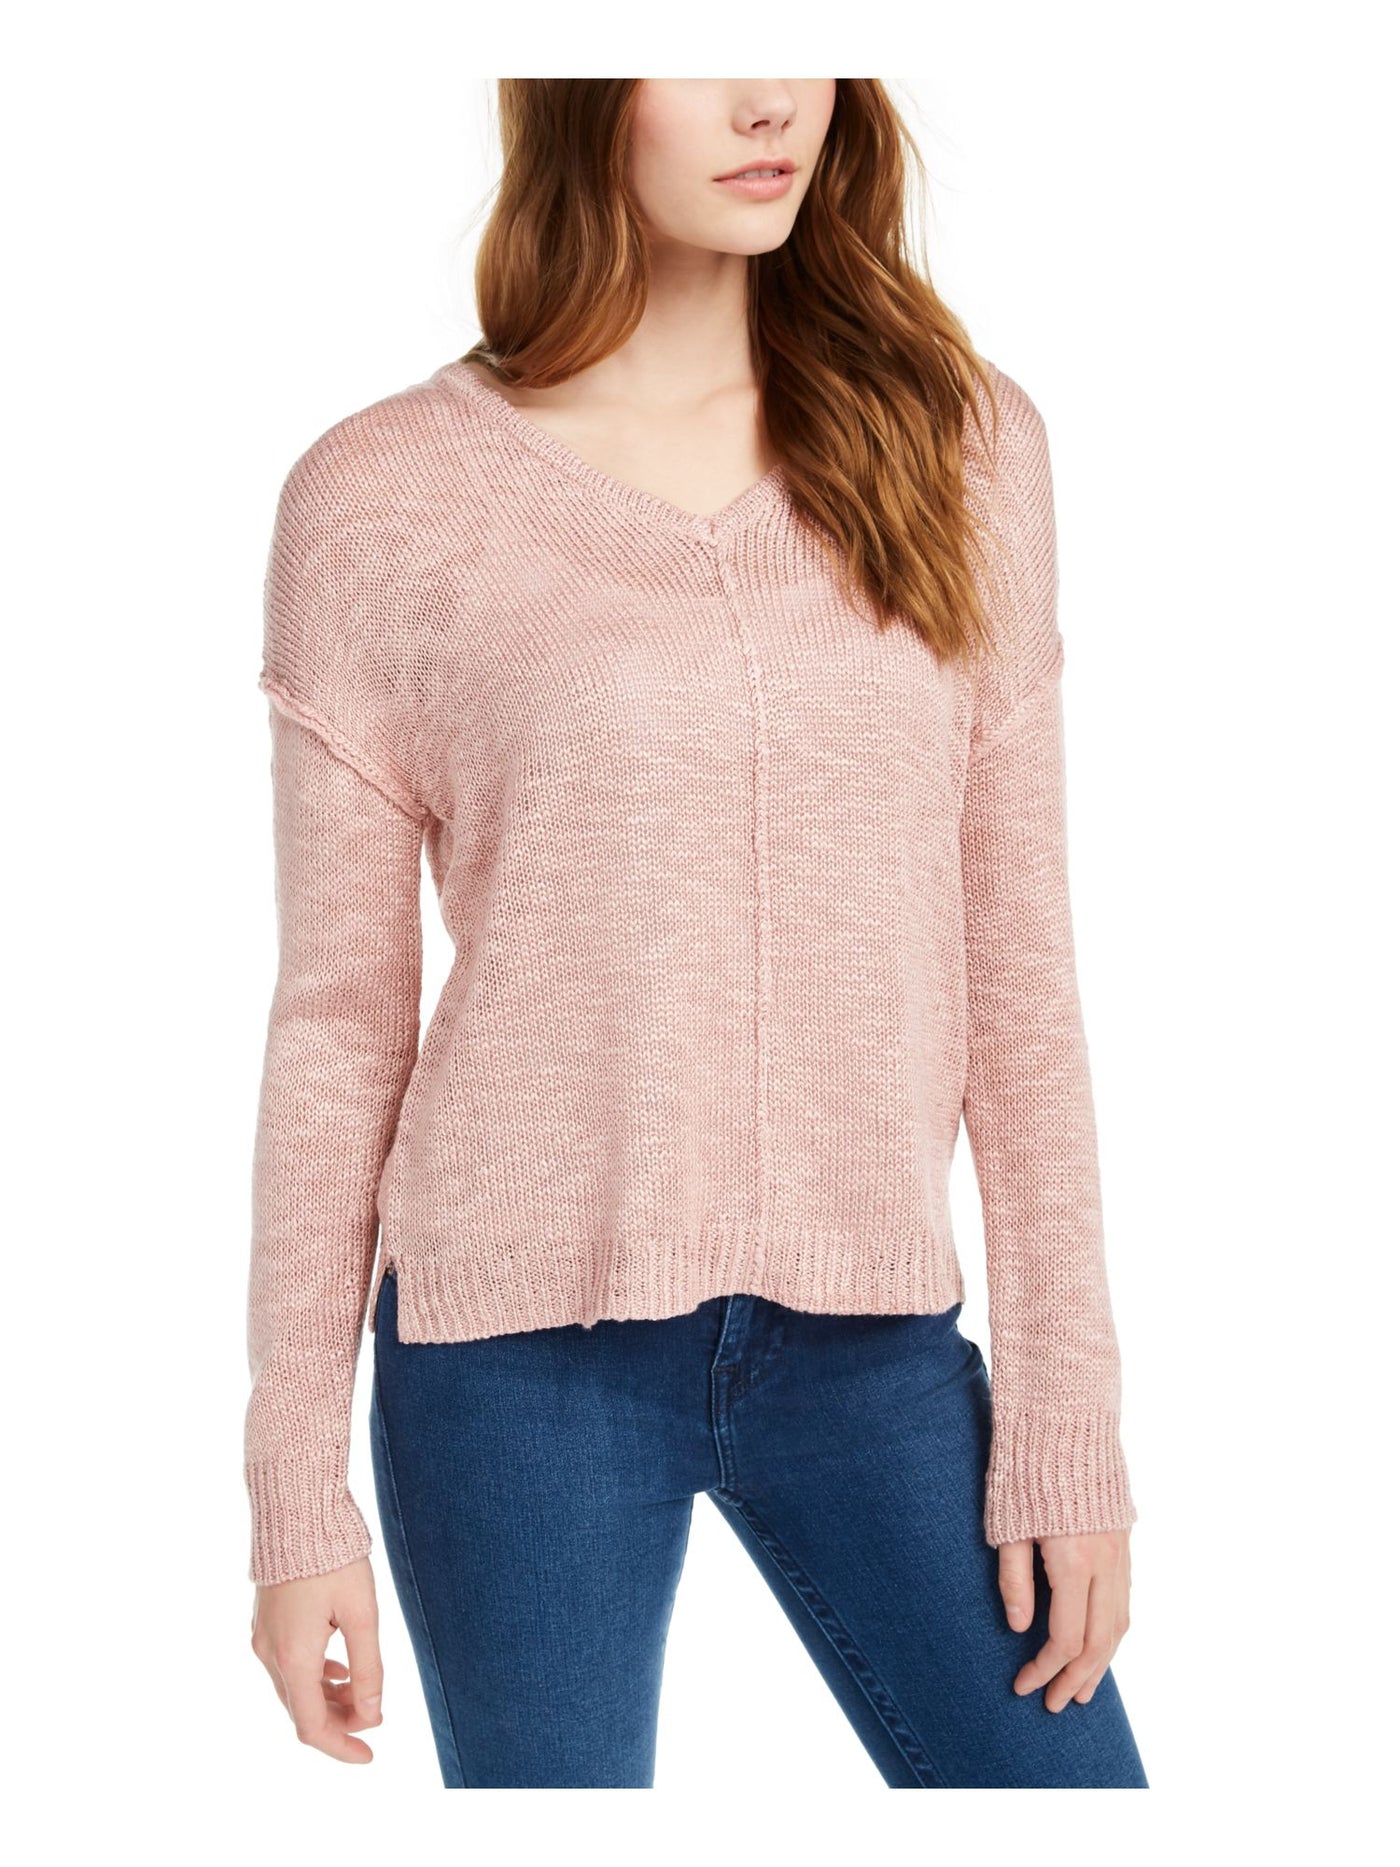 PINK ROSE Womens Long Sleeve Scoop Neck Button Up Sweater